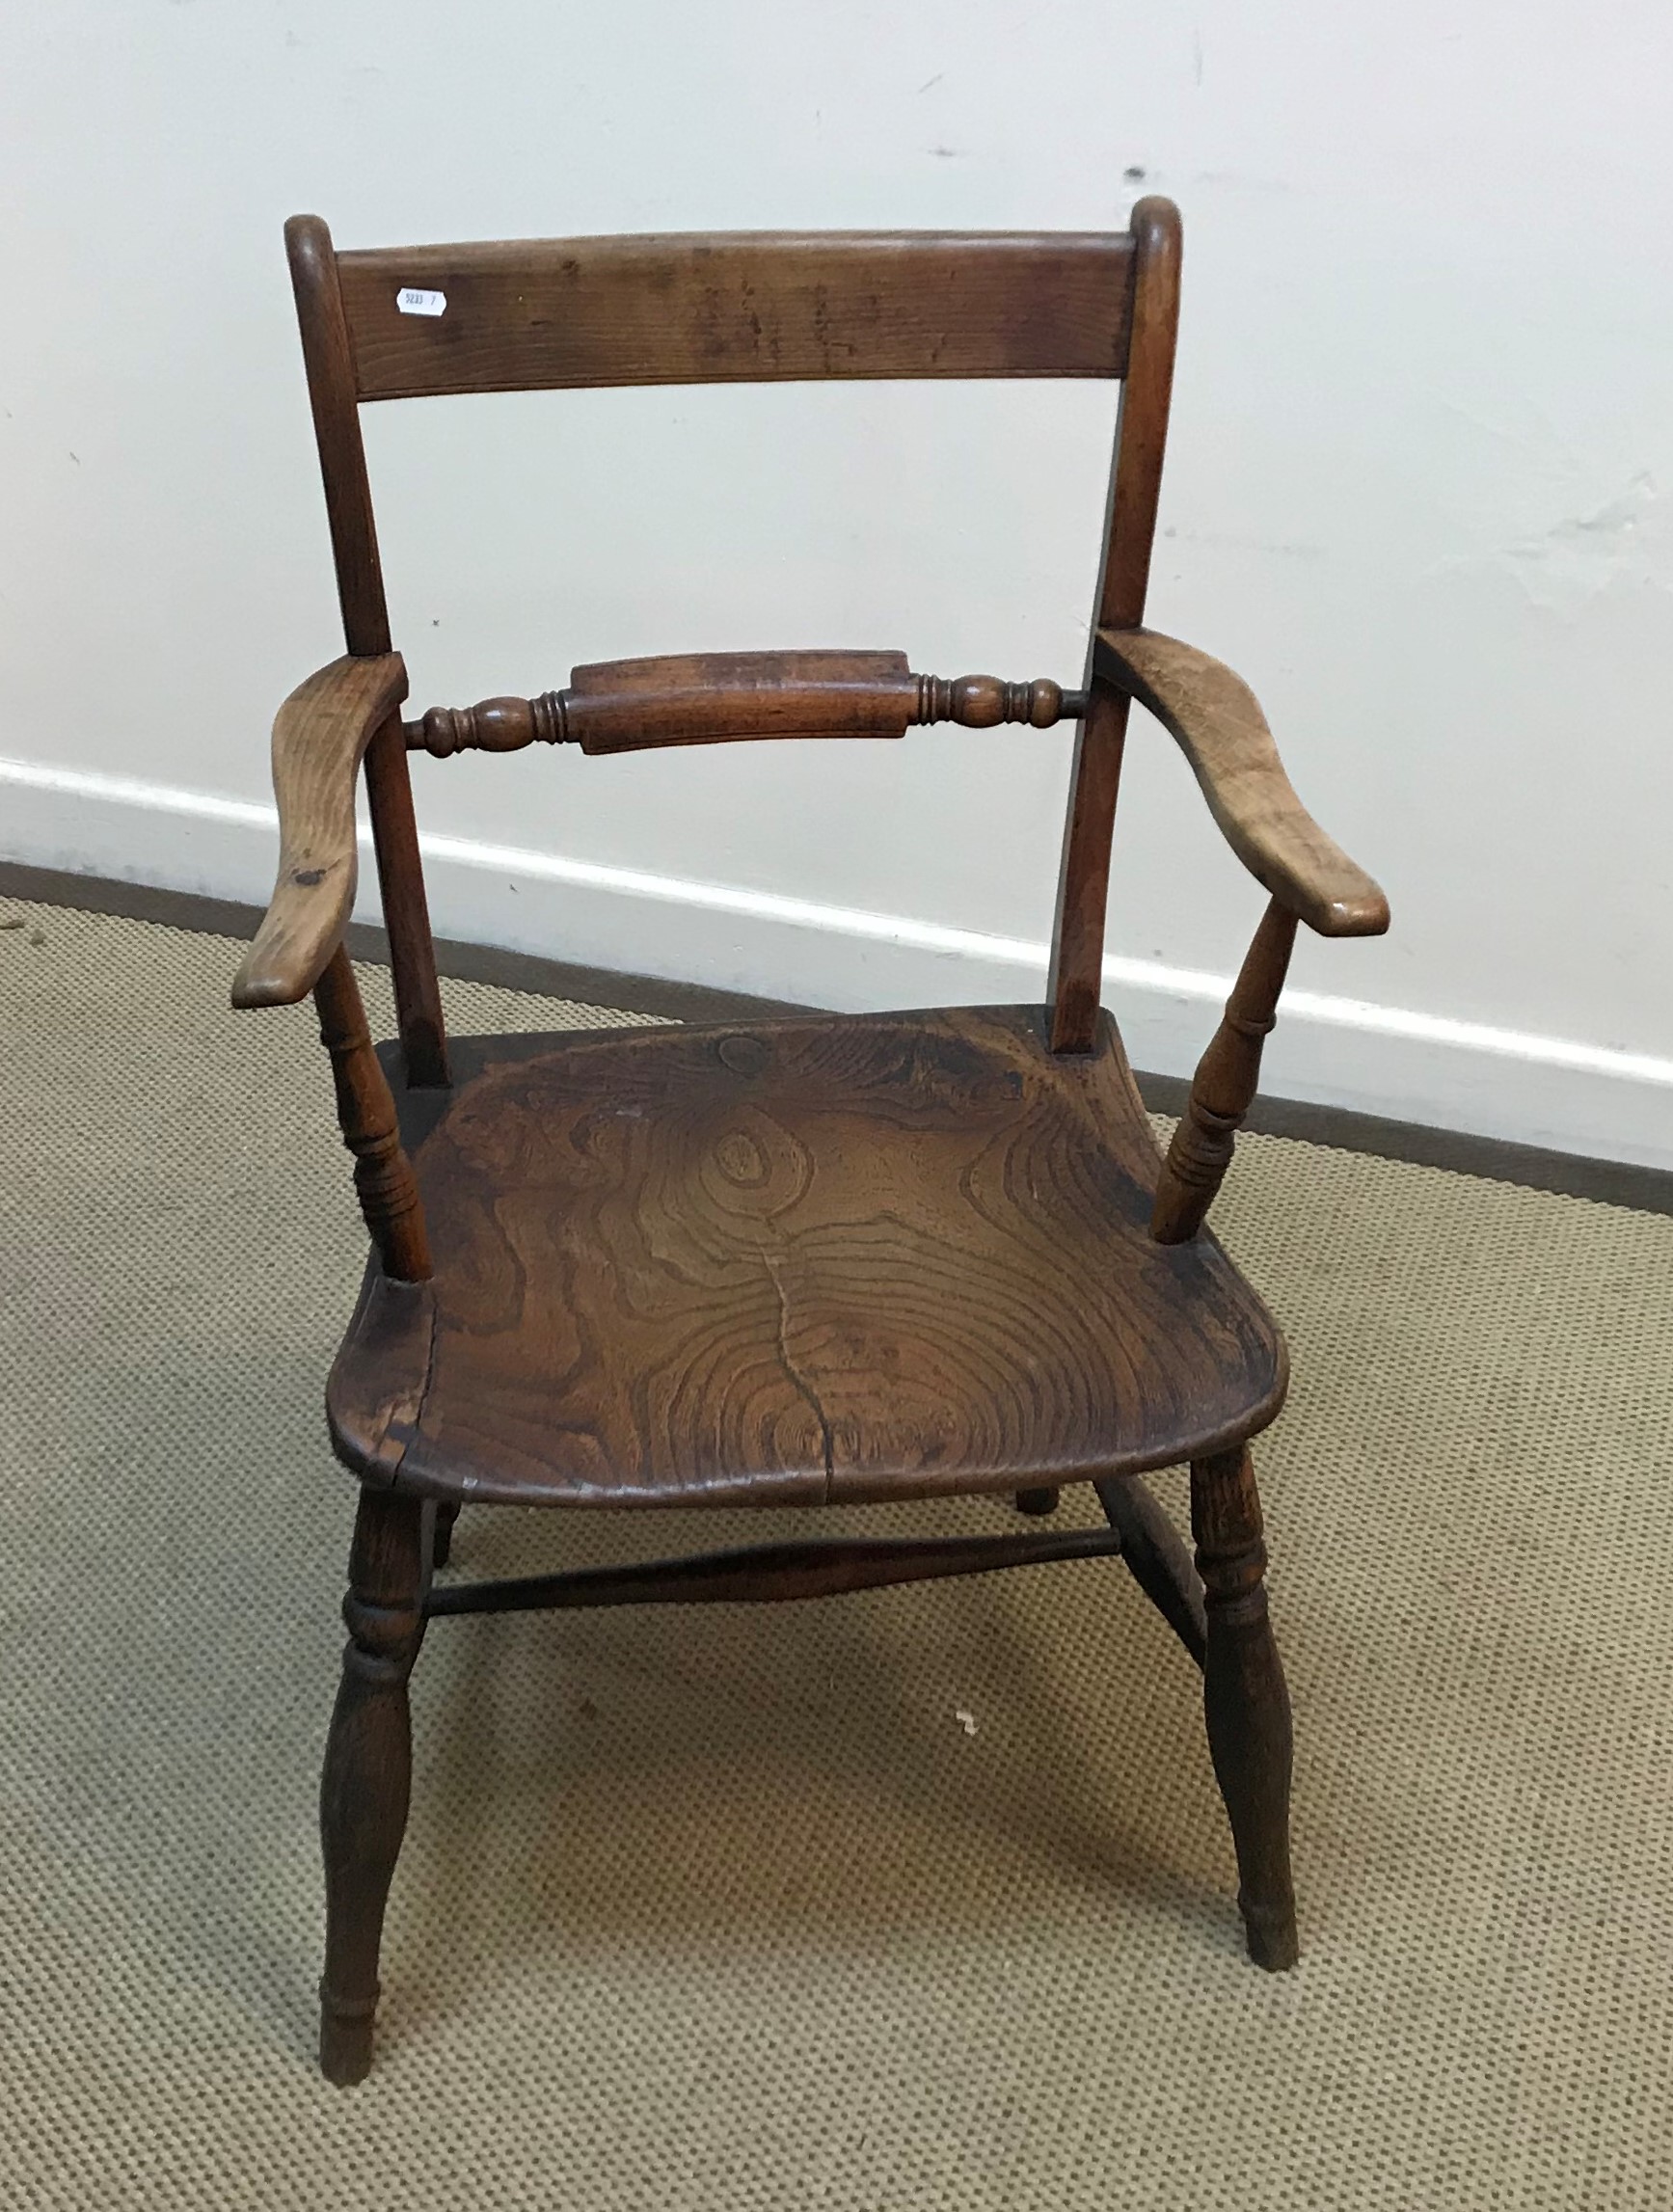 A 19th Century Oxford bar back elbow chair, a circa 1900 stained beech deep rectangular tray, - Image 2 of 4